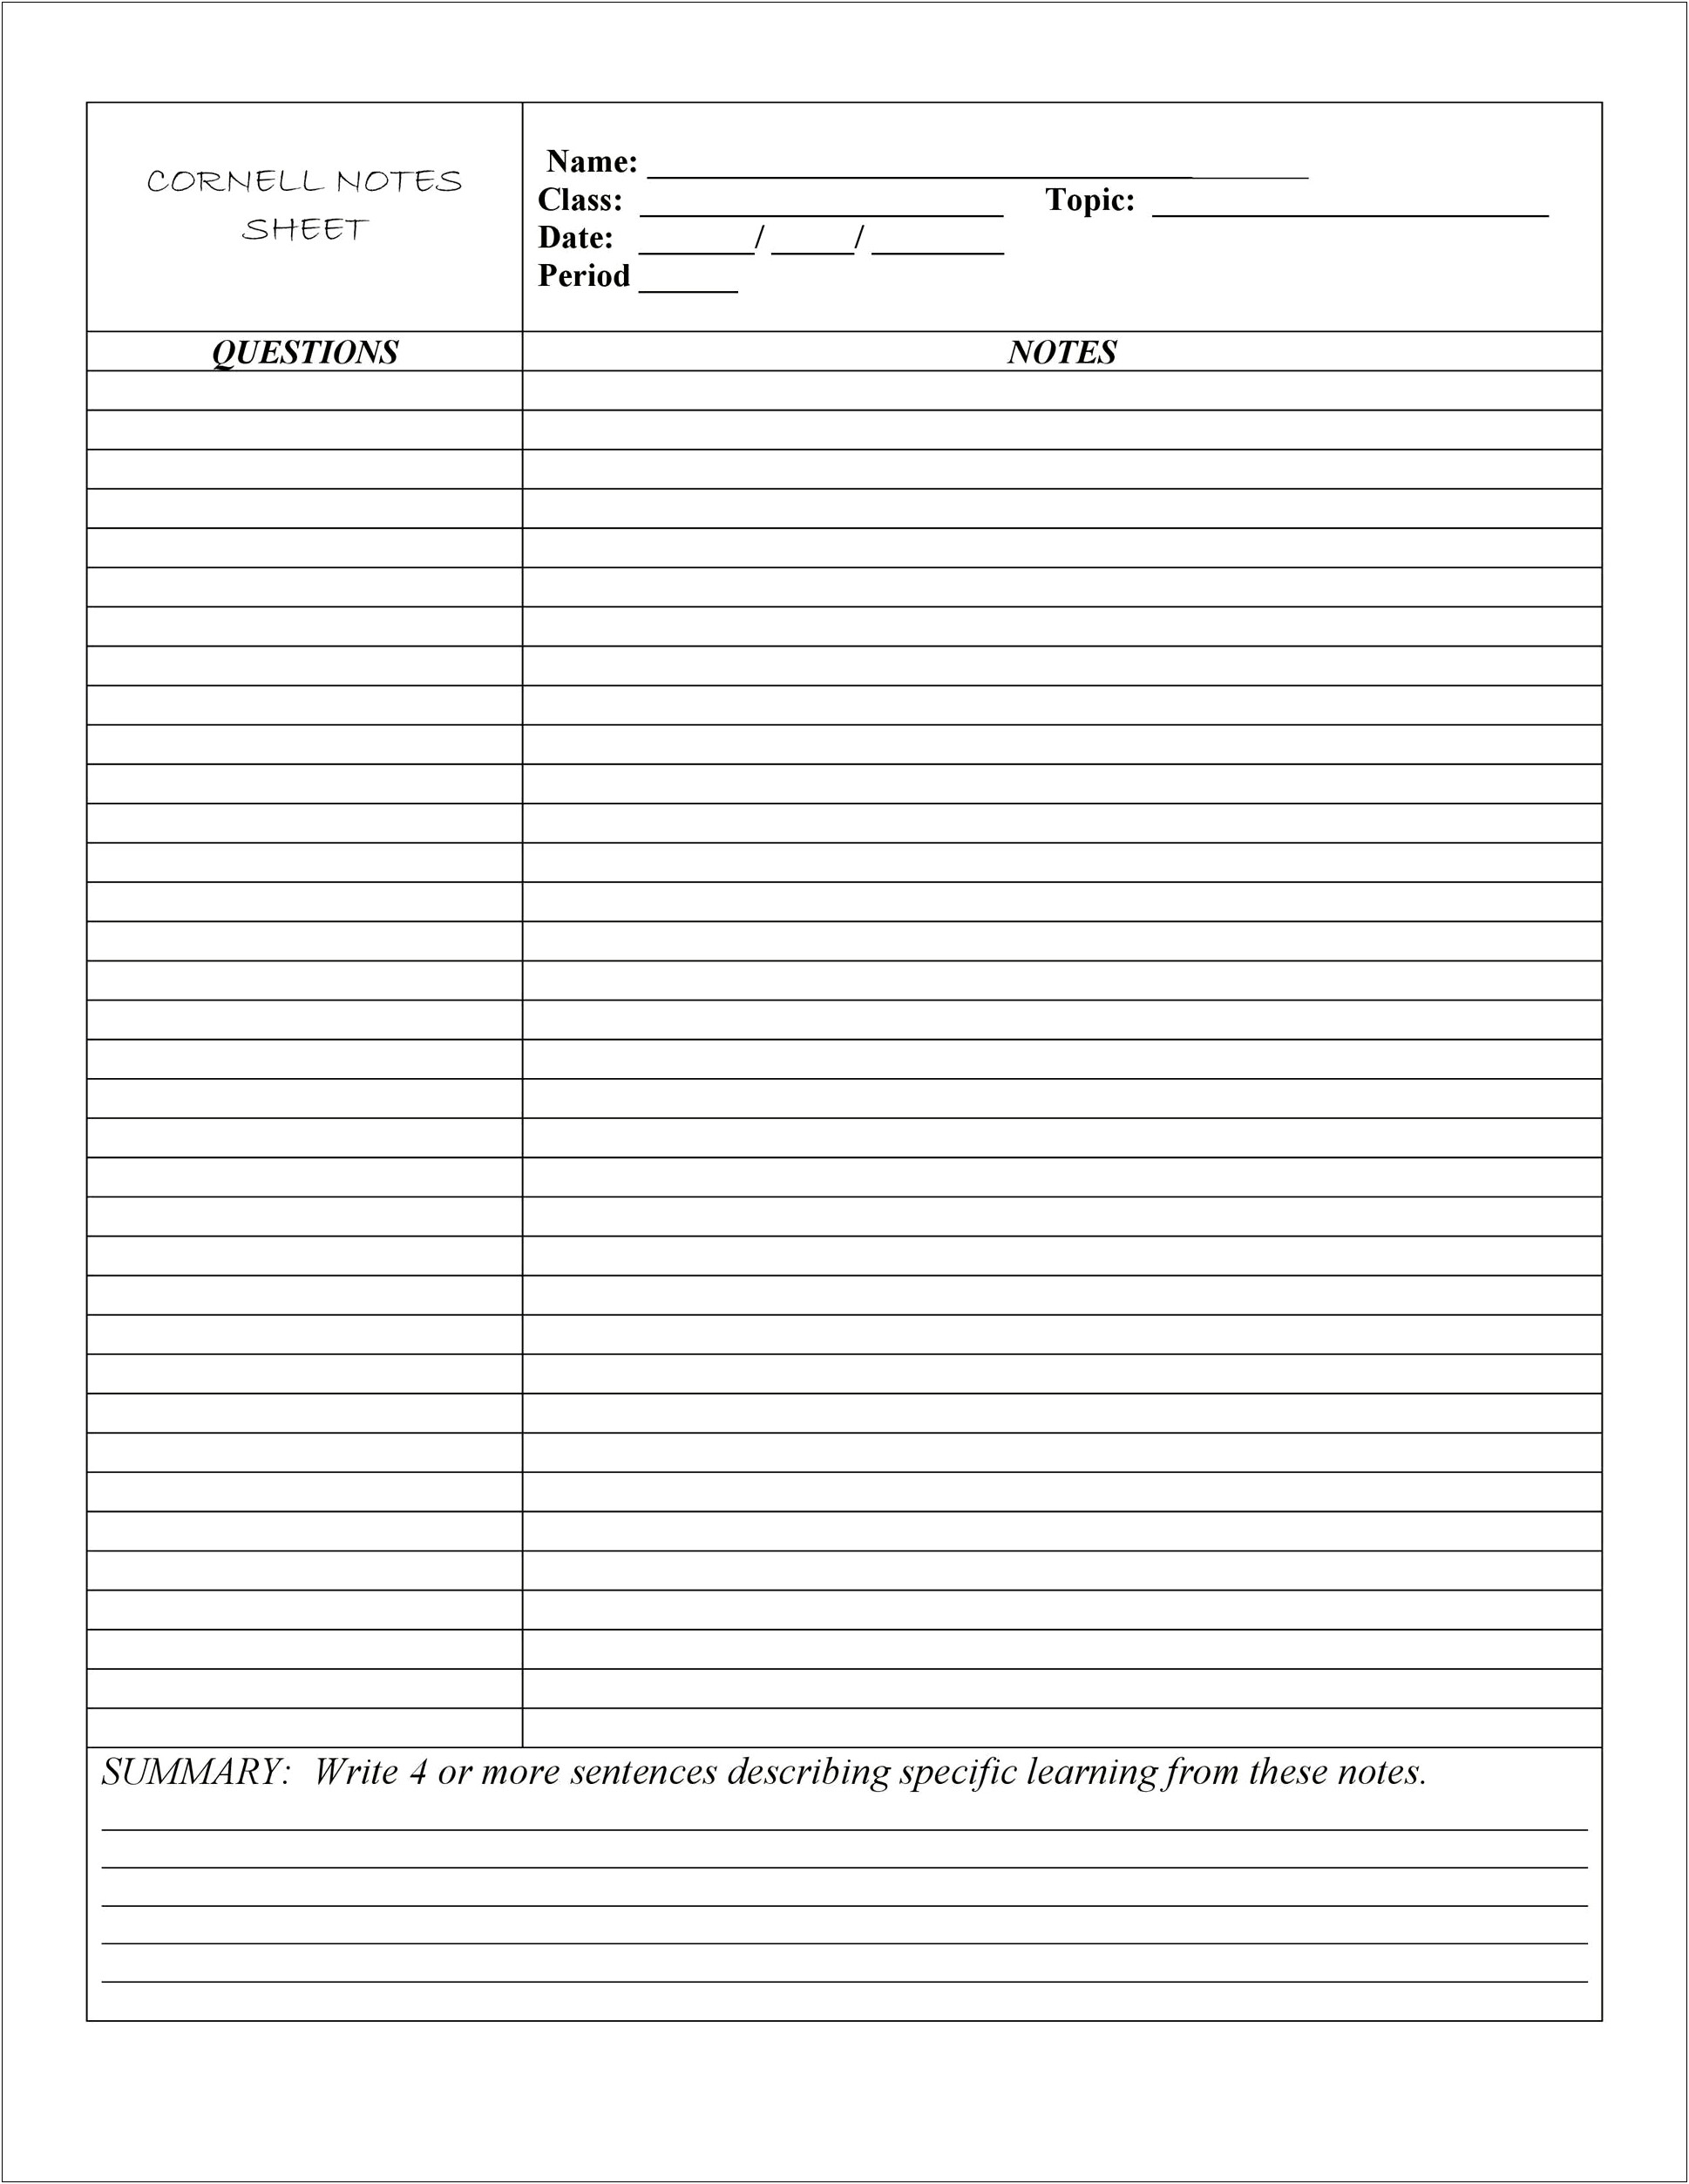 Ddownload Cornell Note Template For Word